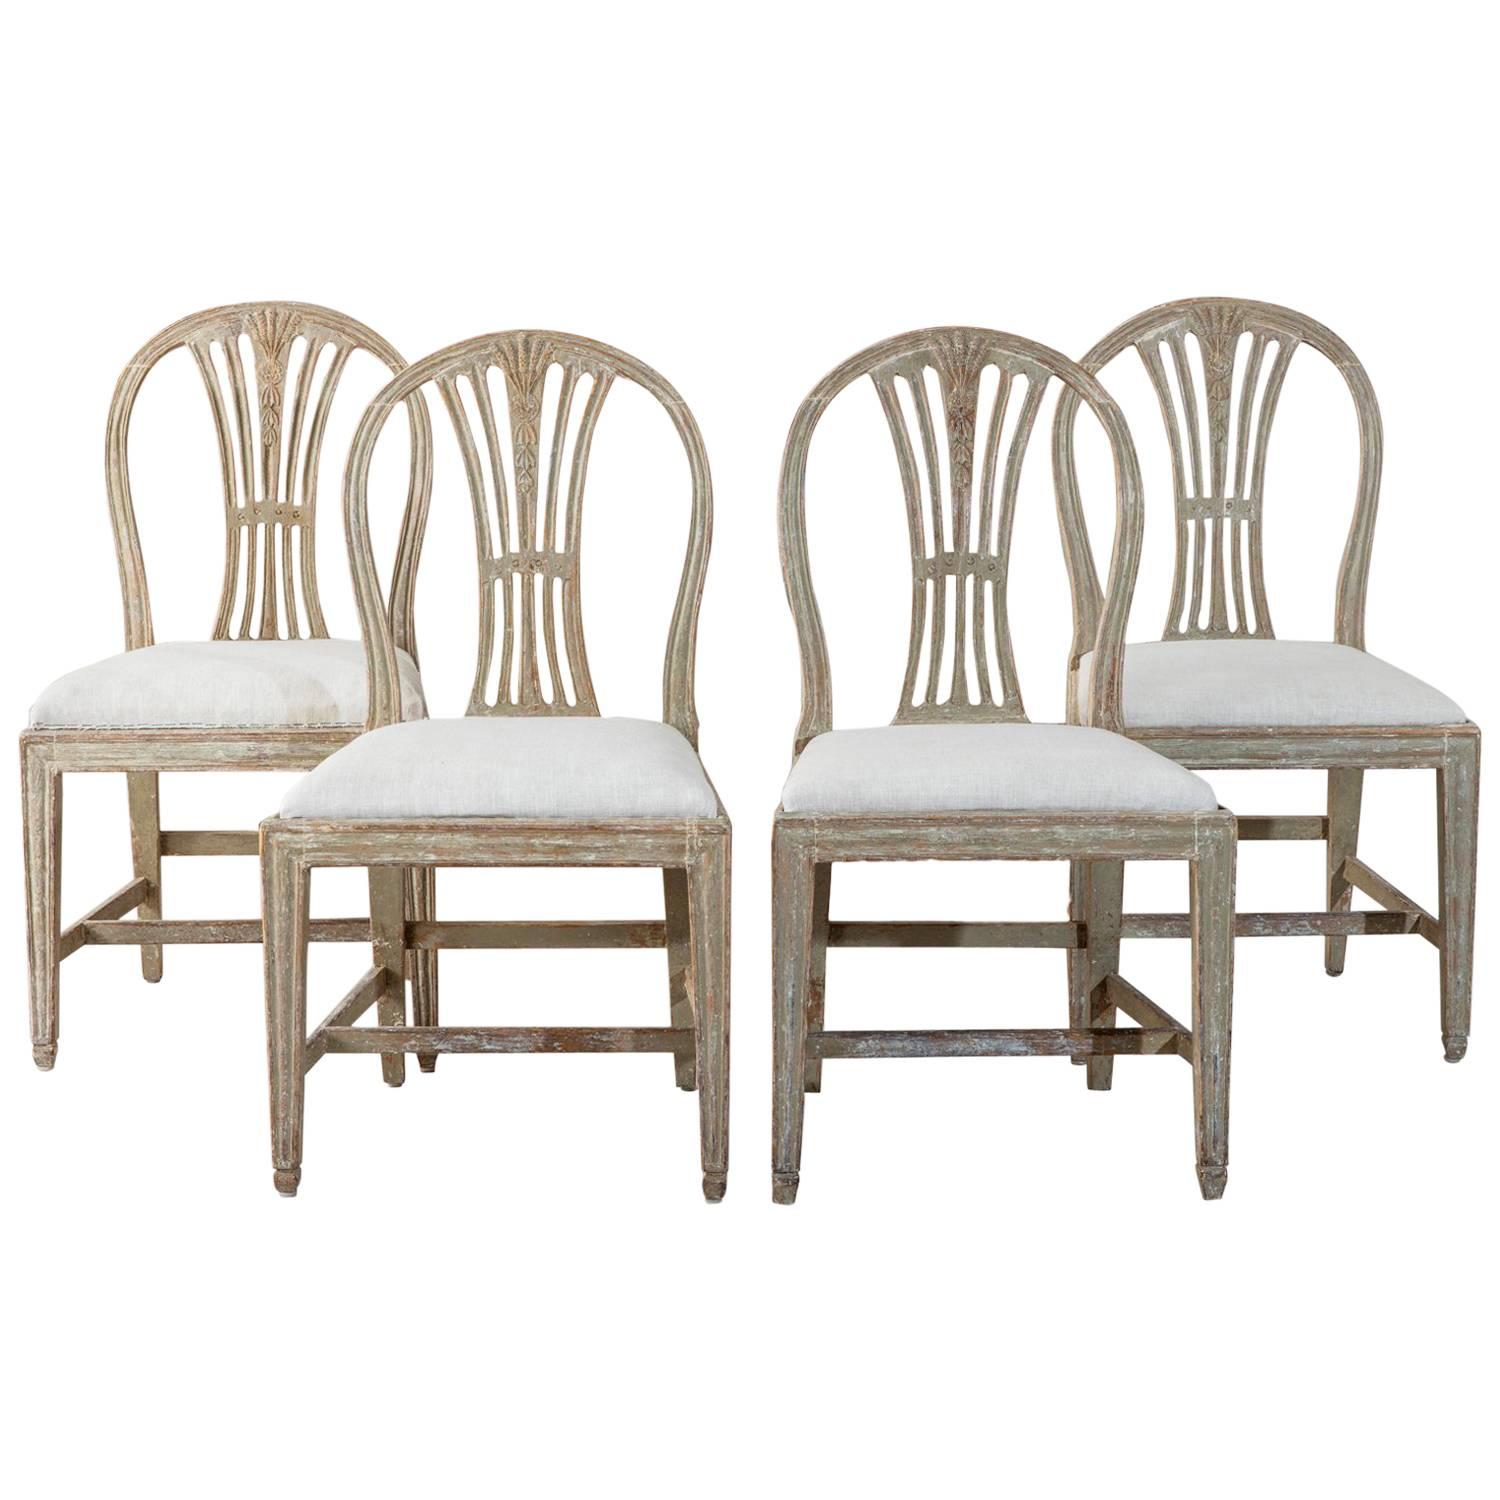 18th Century Swedish Period Gustavian Oval Back Side Chairs in Original Paint